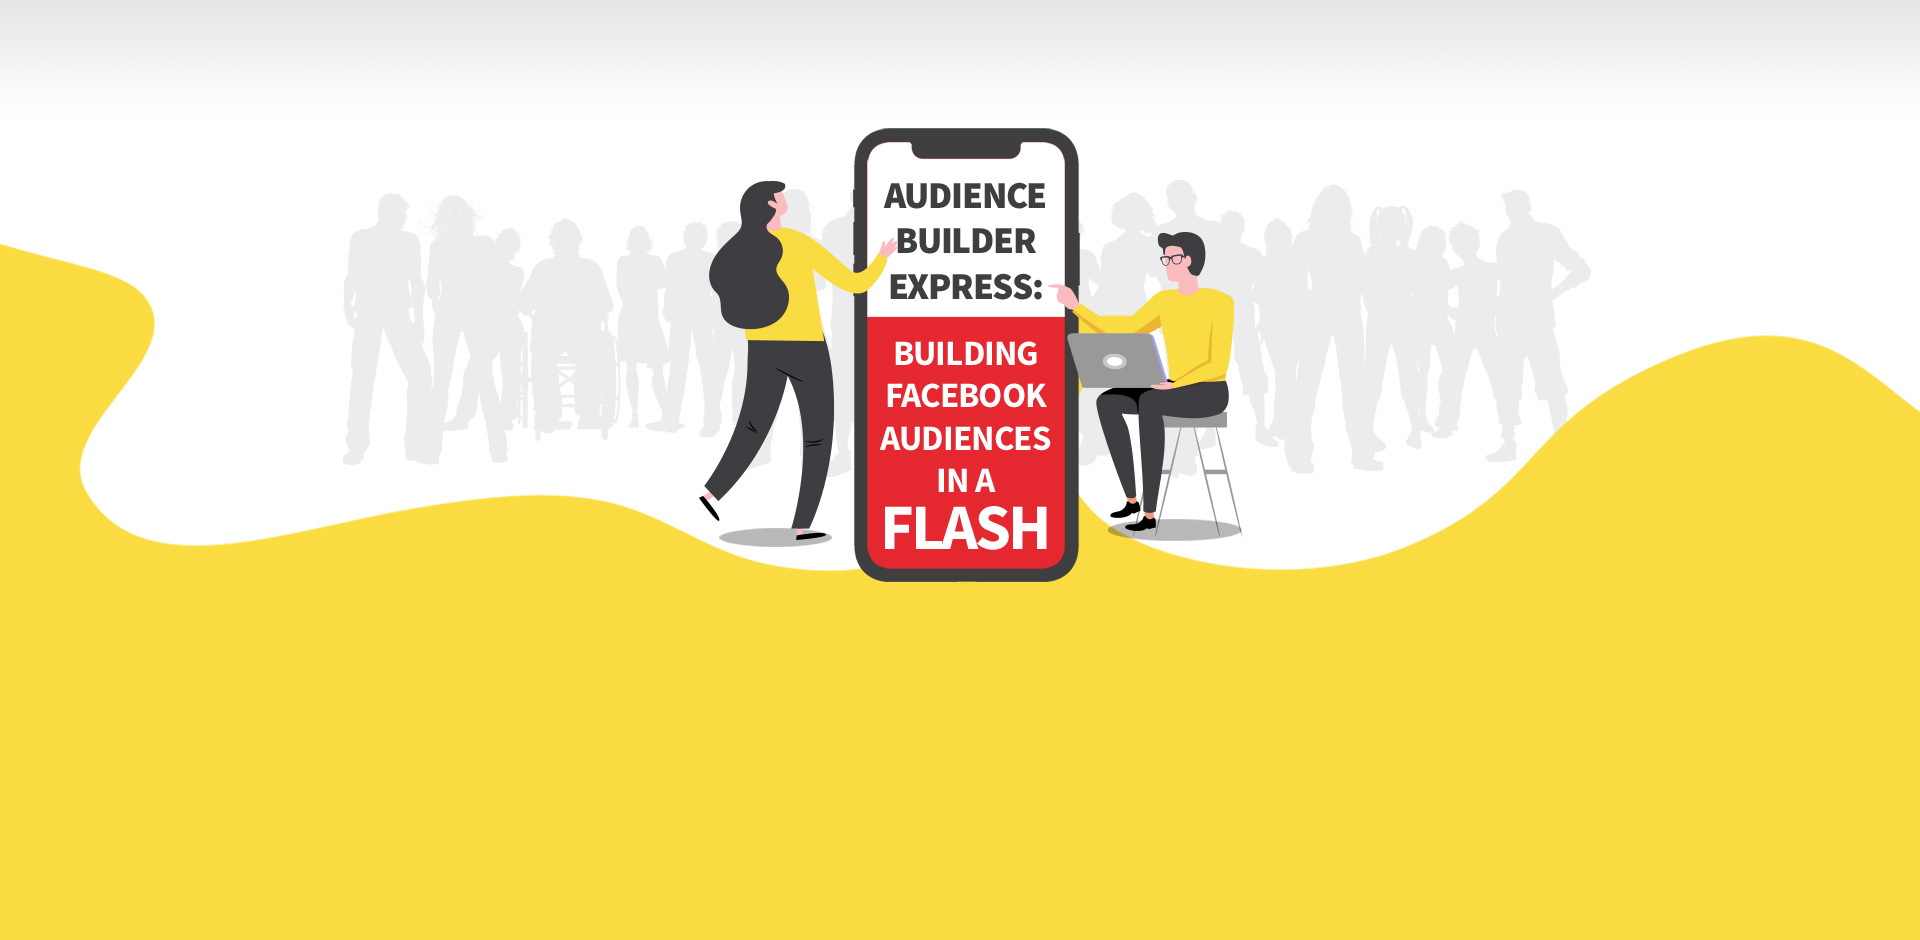 Audience Builder Express: Building Facebook Audiences in a Flash